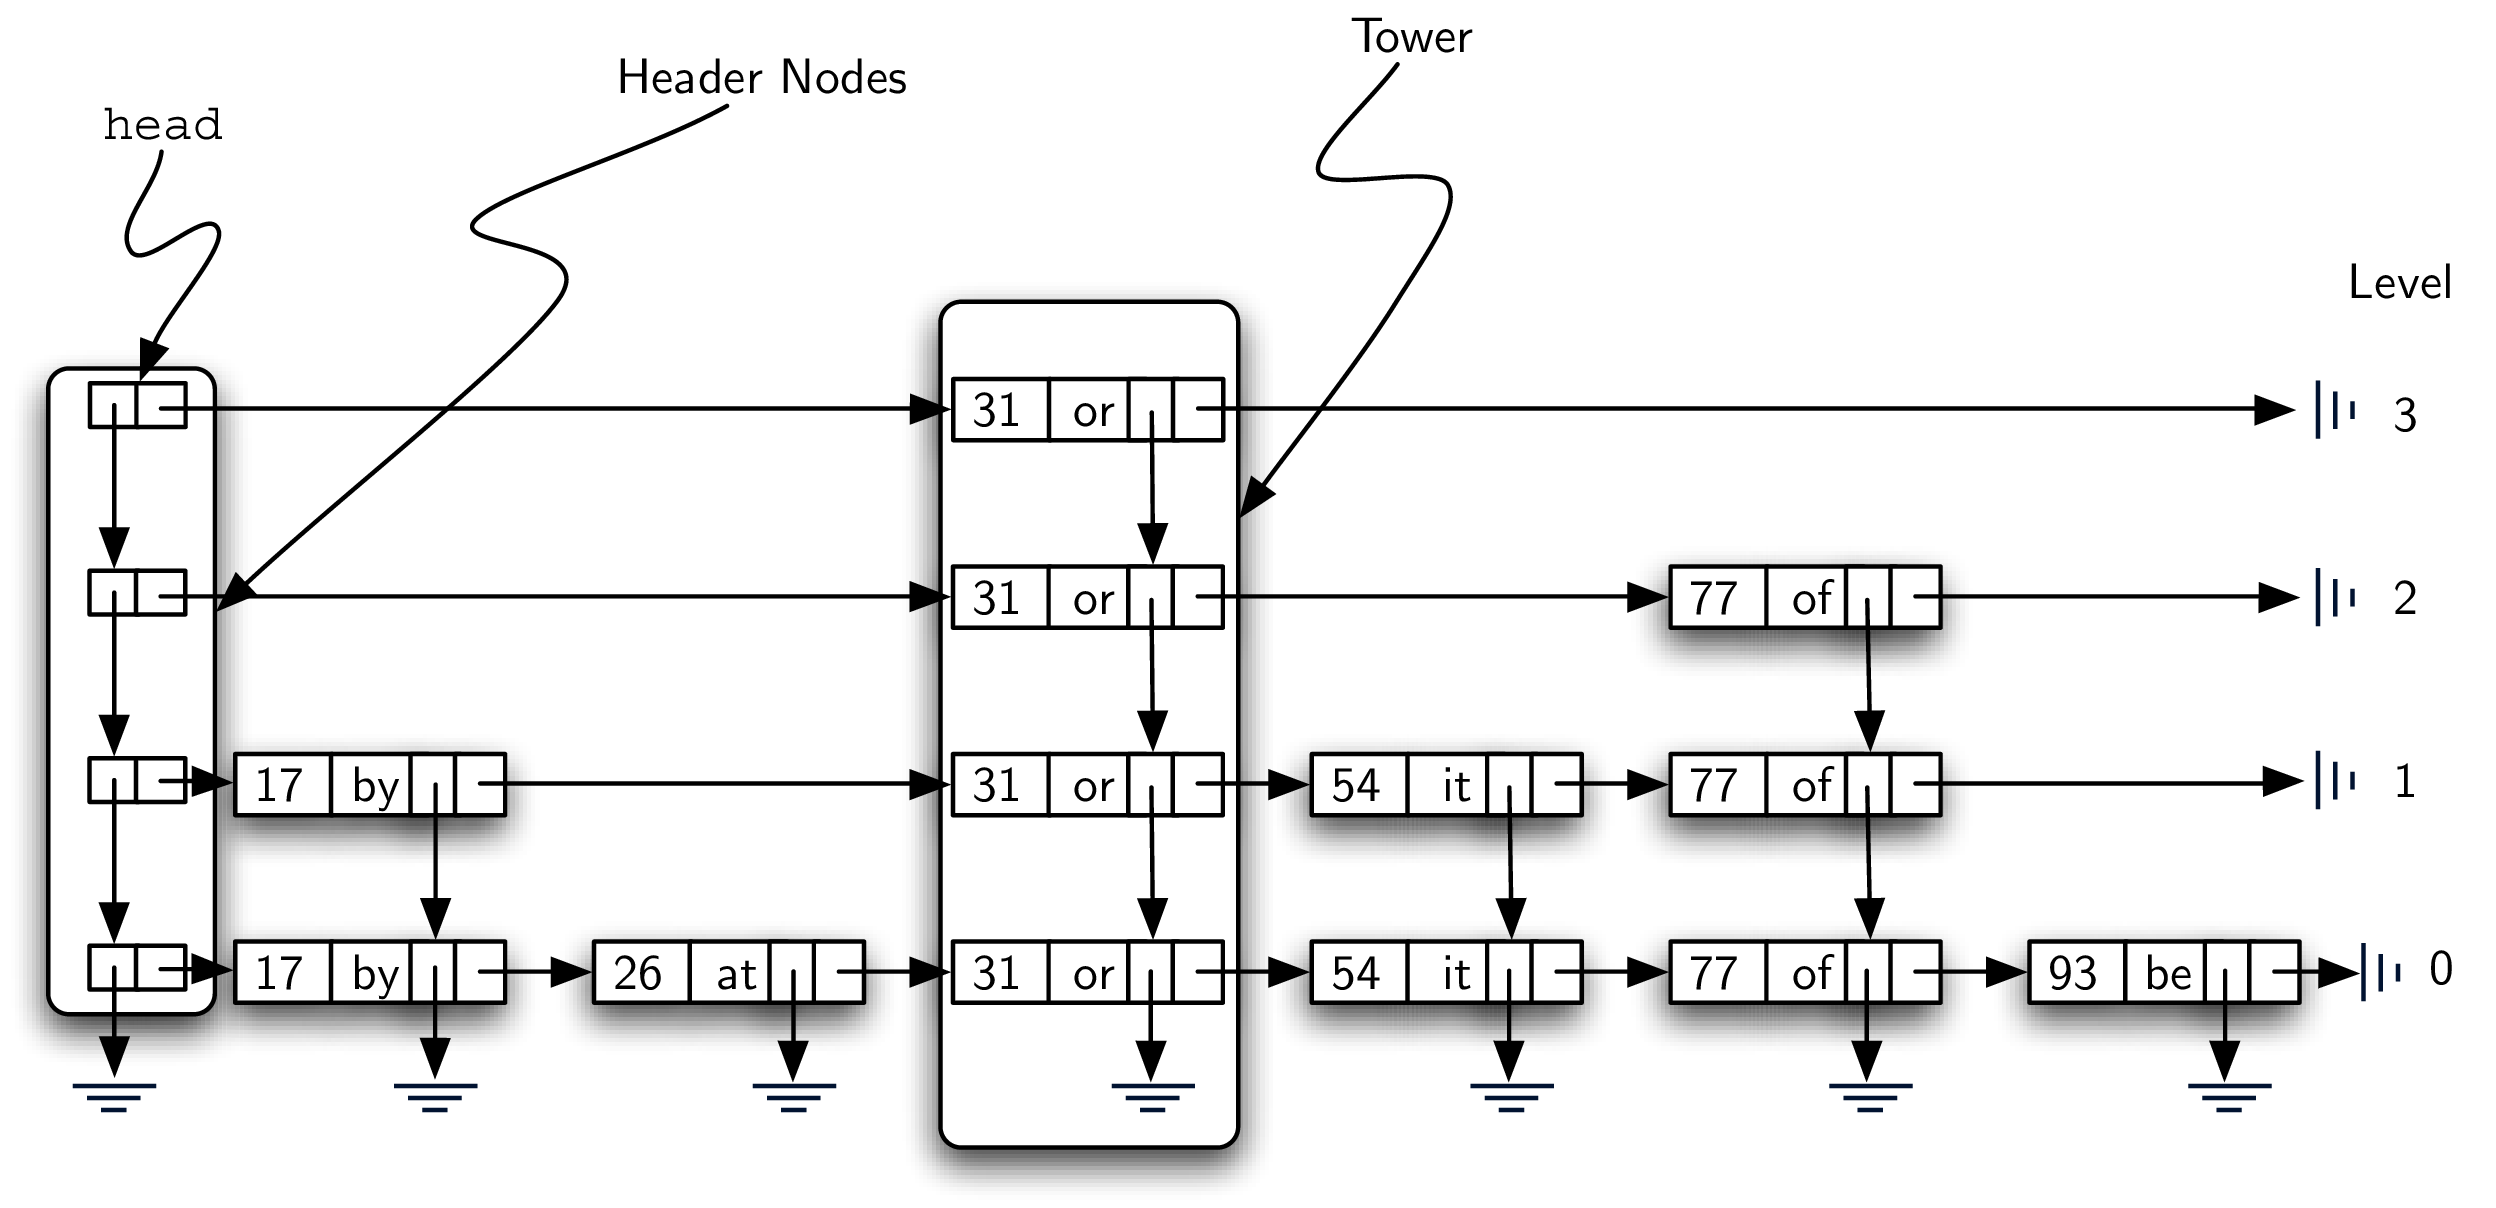 Header Nodes and Towers